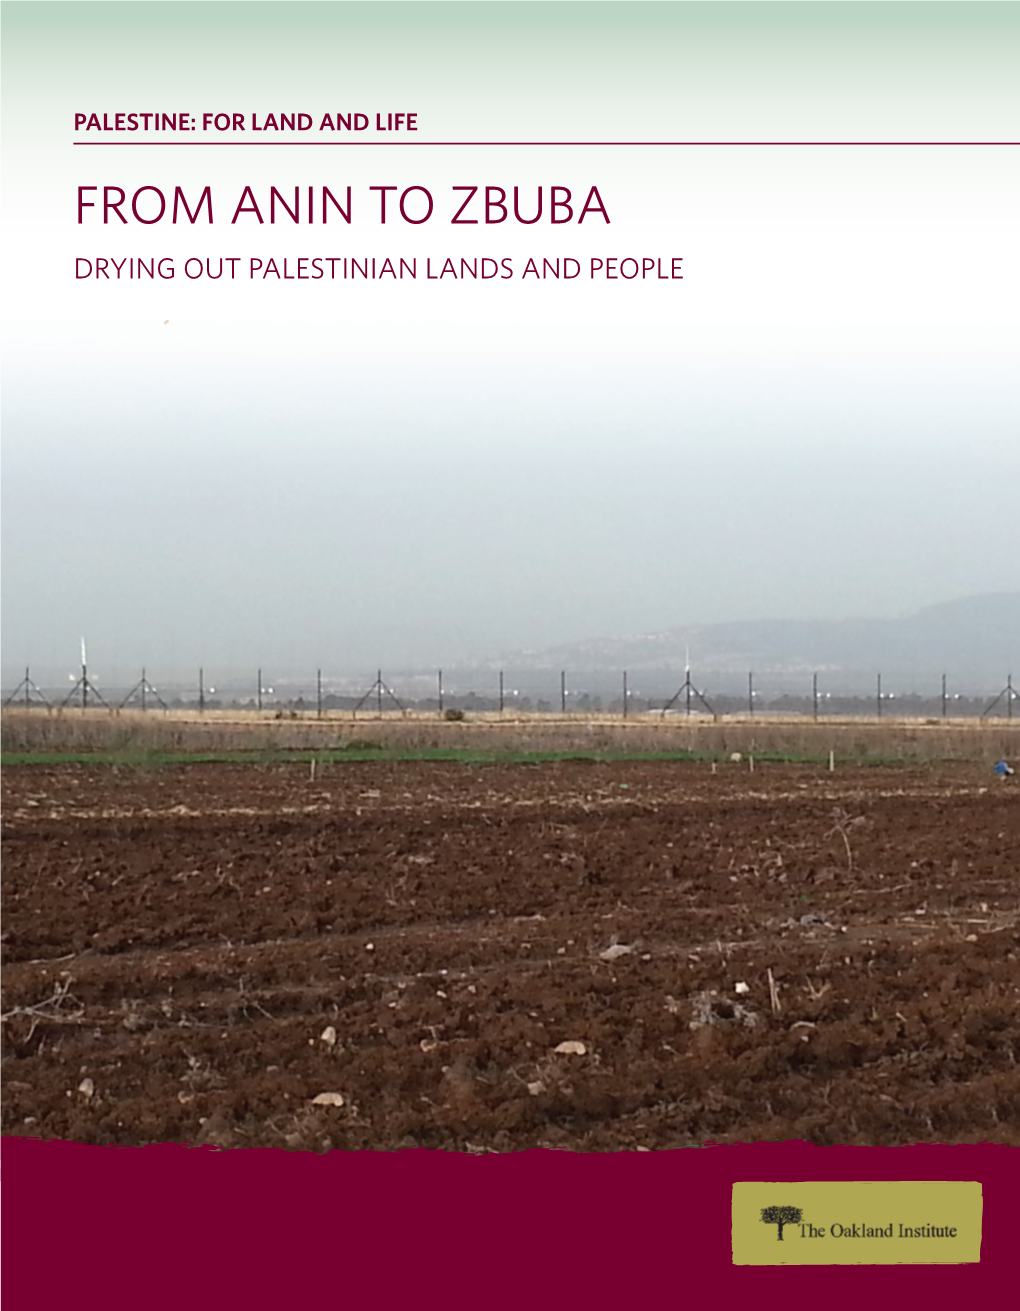 From Anin to Zbuba: Drying out Palestinian